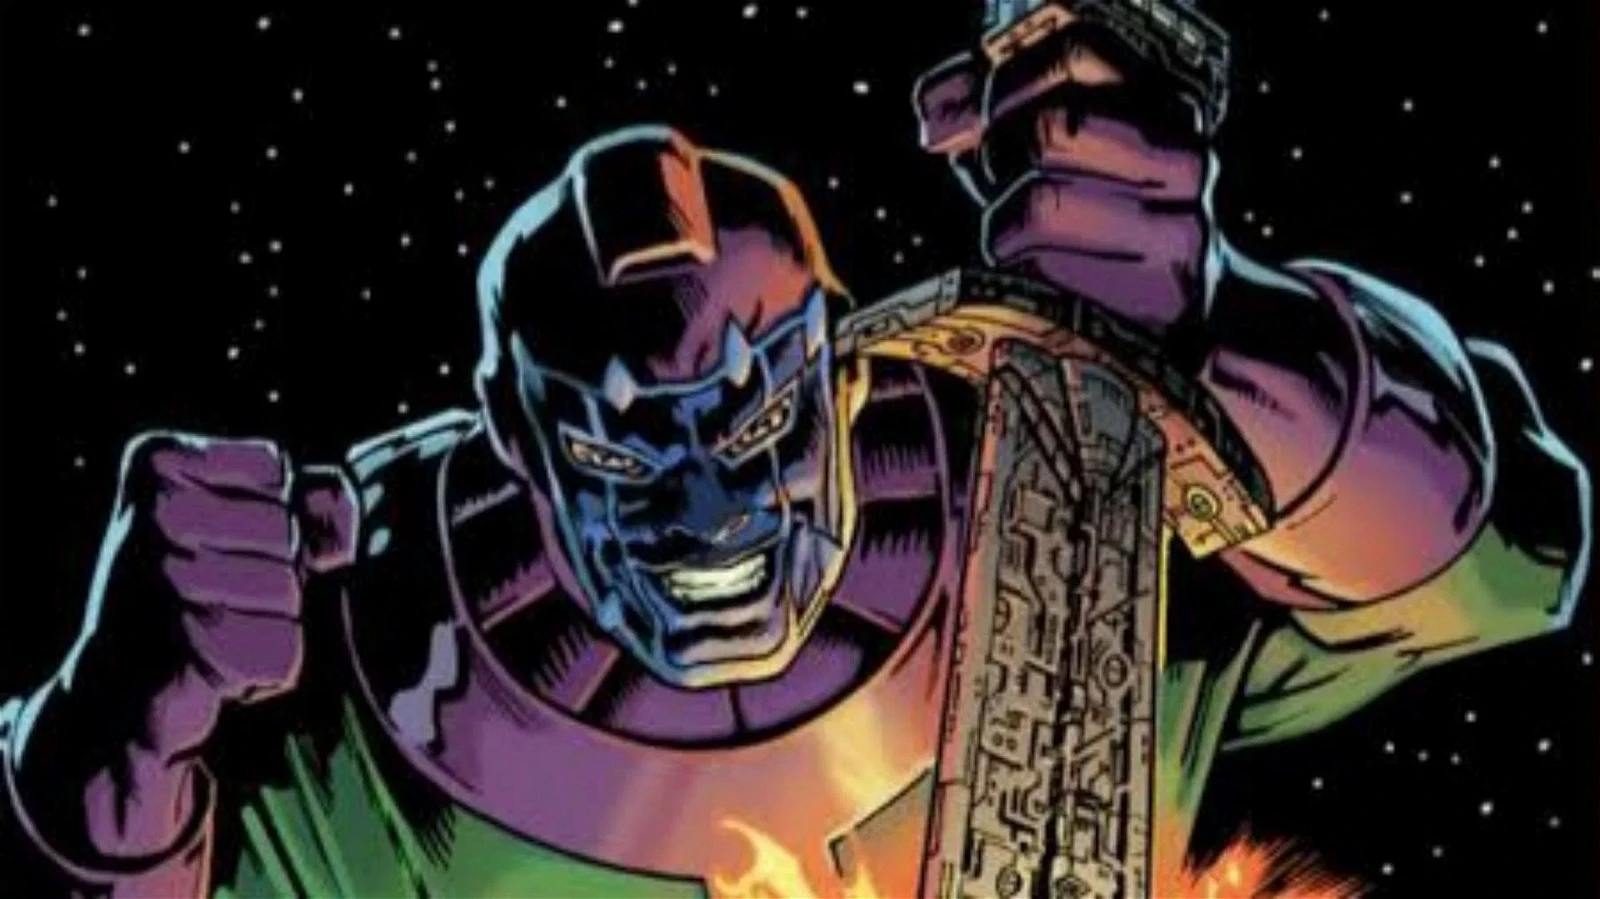 Kang the Conqueror is one of the big baddies out there.